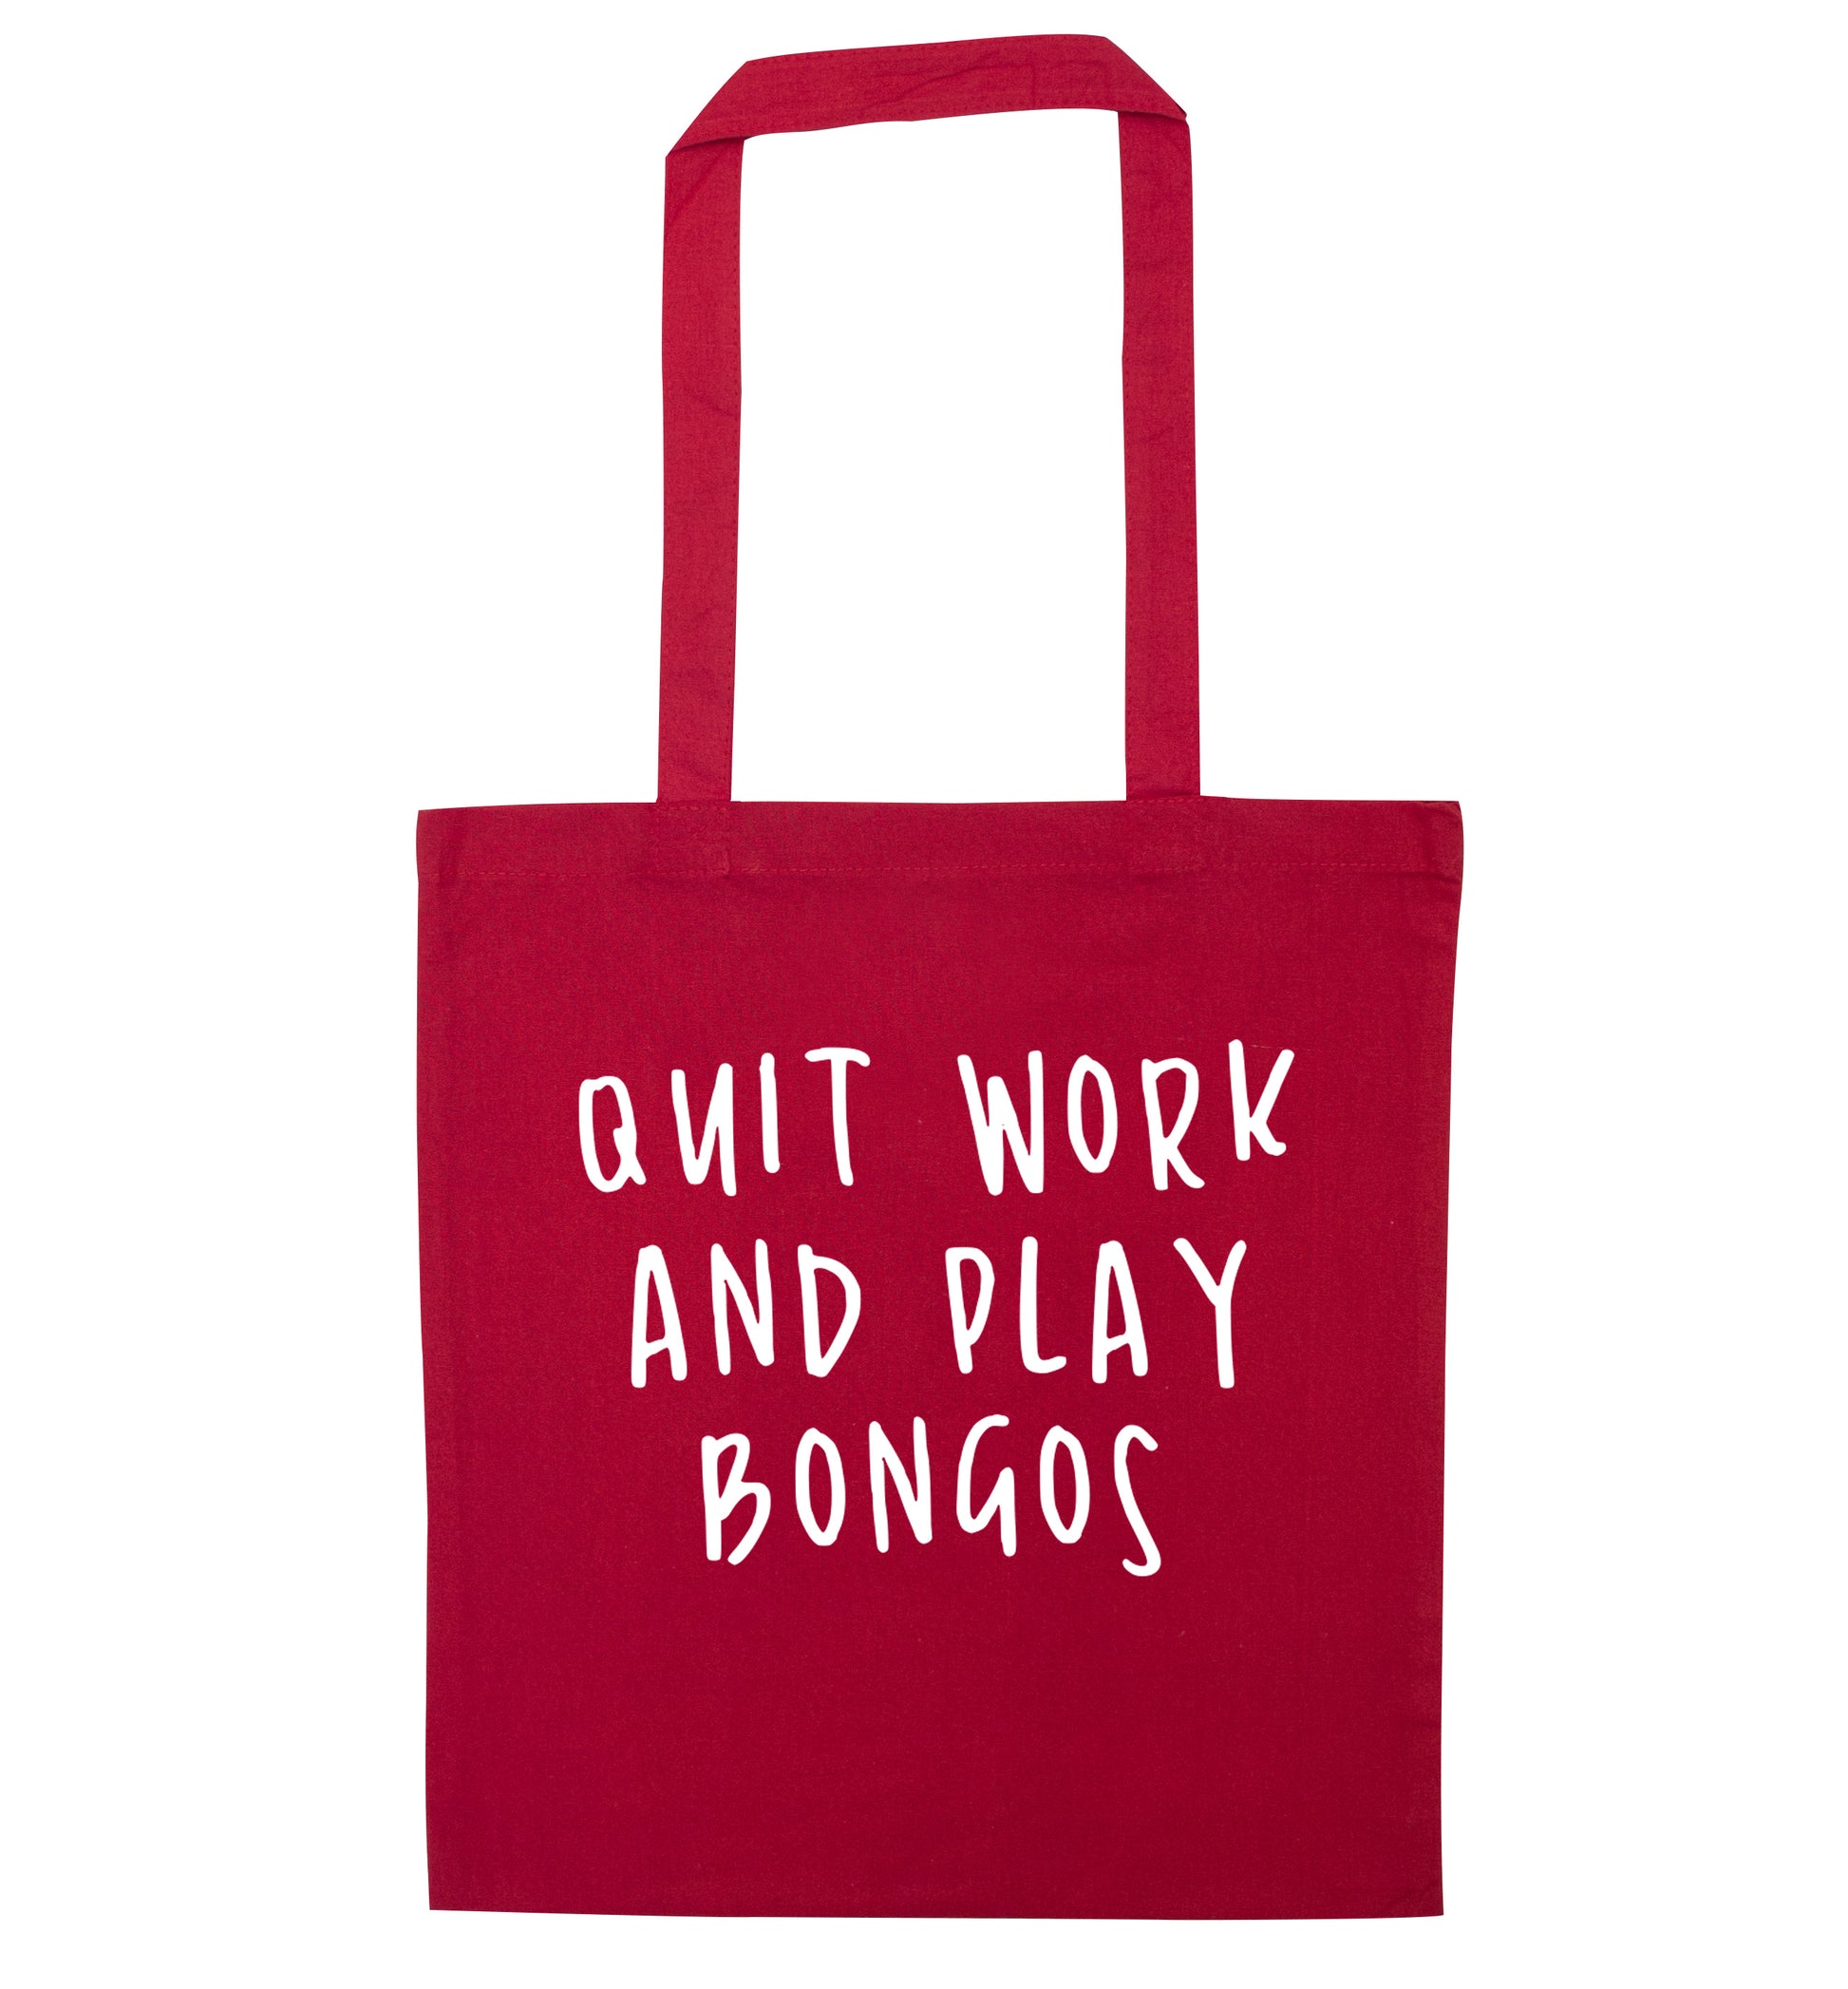 Quit work and play bongos red tote bag